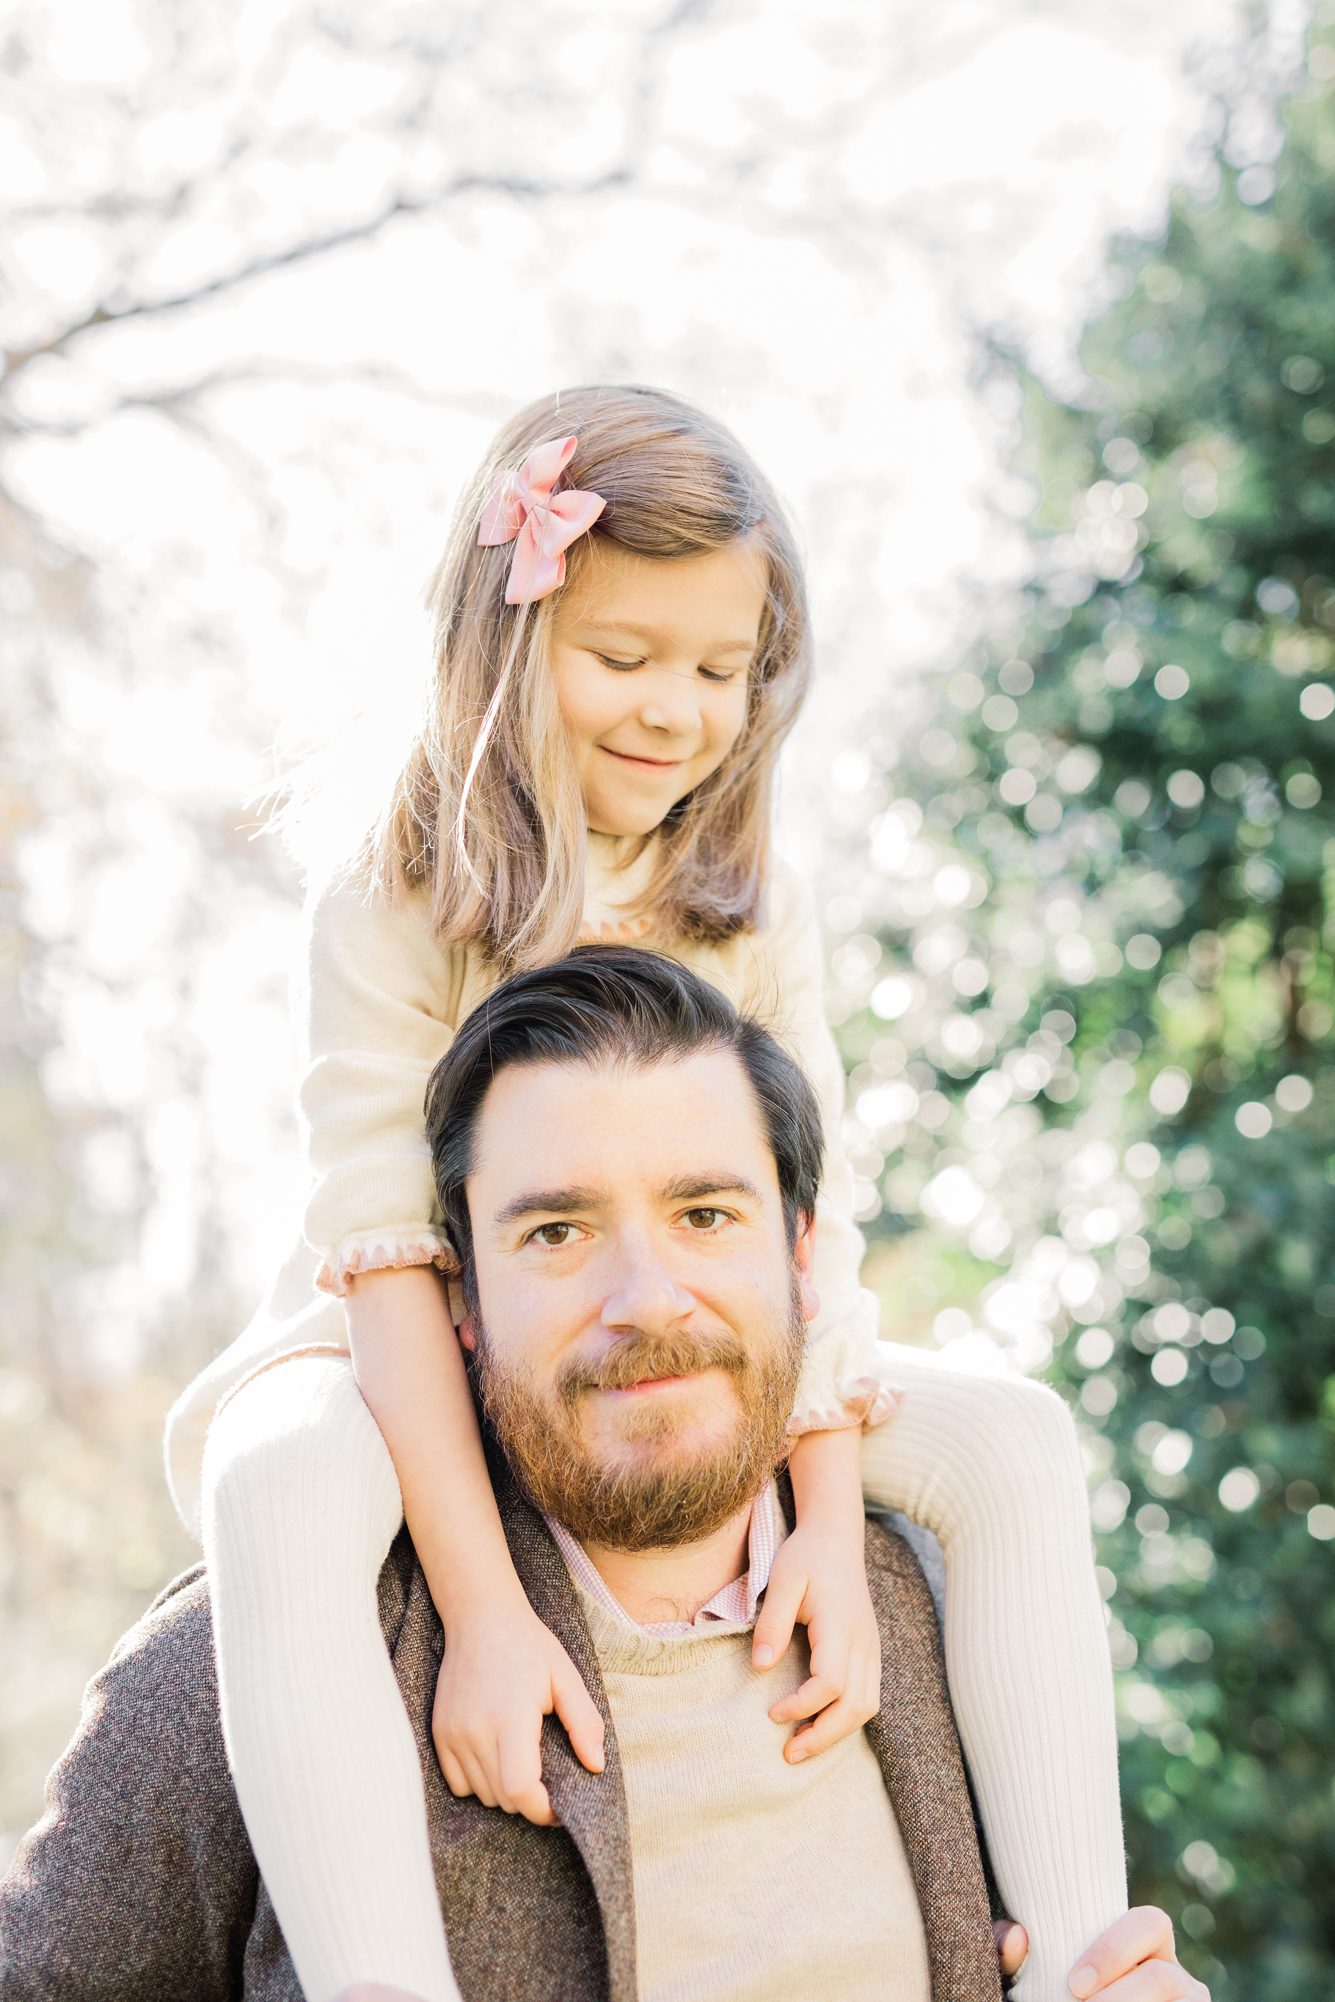 Daughter on Dad's shoulders during family photo session. Photo by LRG Portraits.